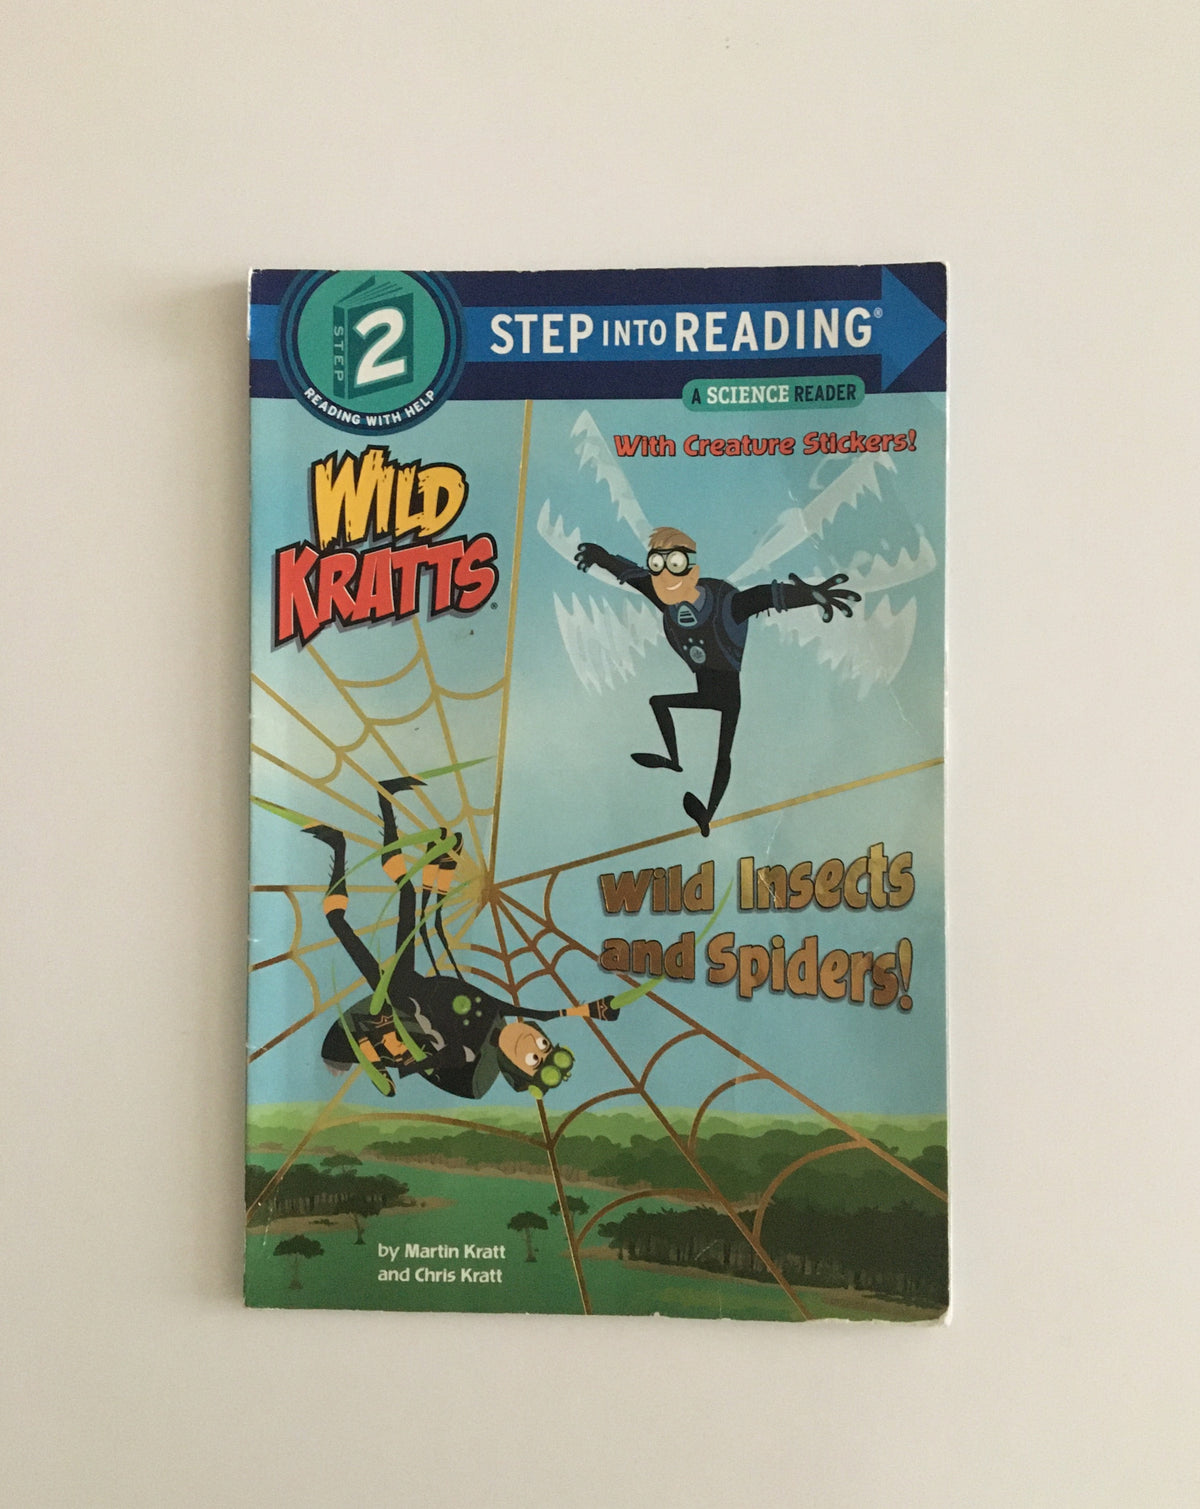 Wild Kratts: Wild Insects and Spiders by the Kratt Brothers